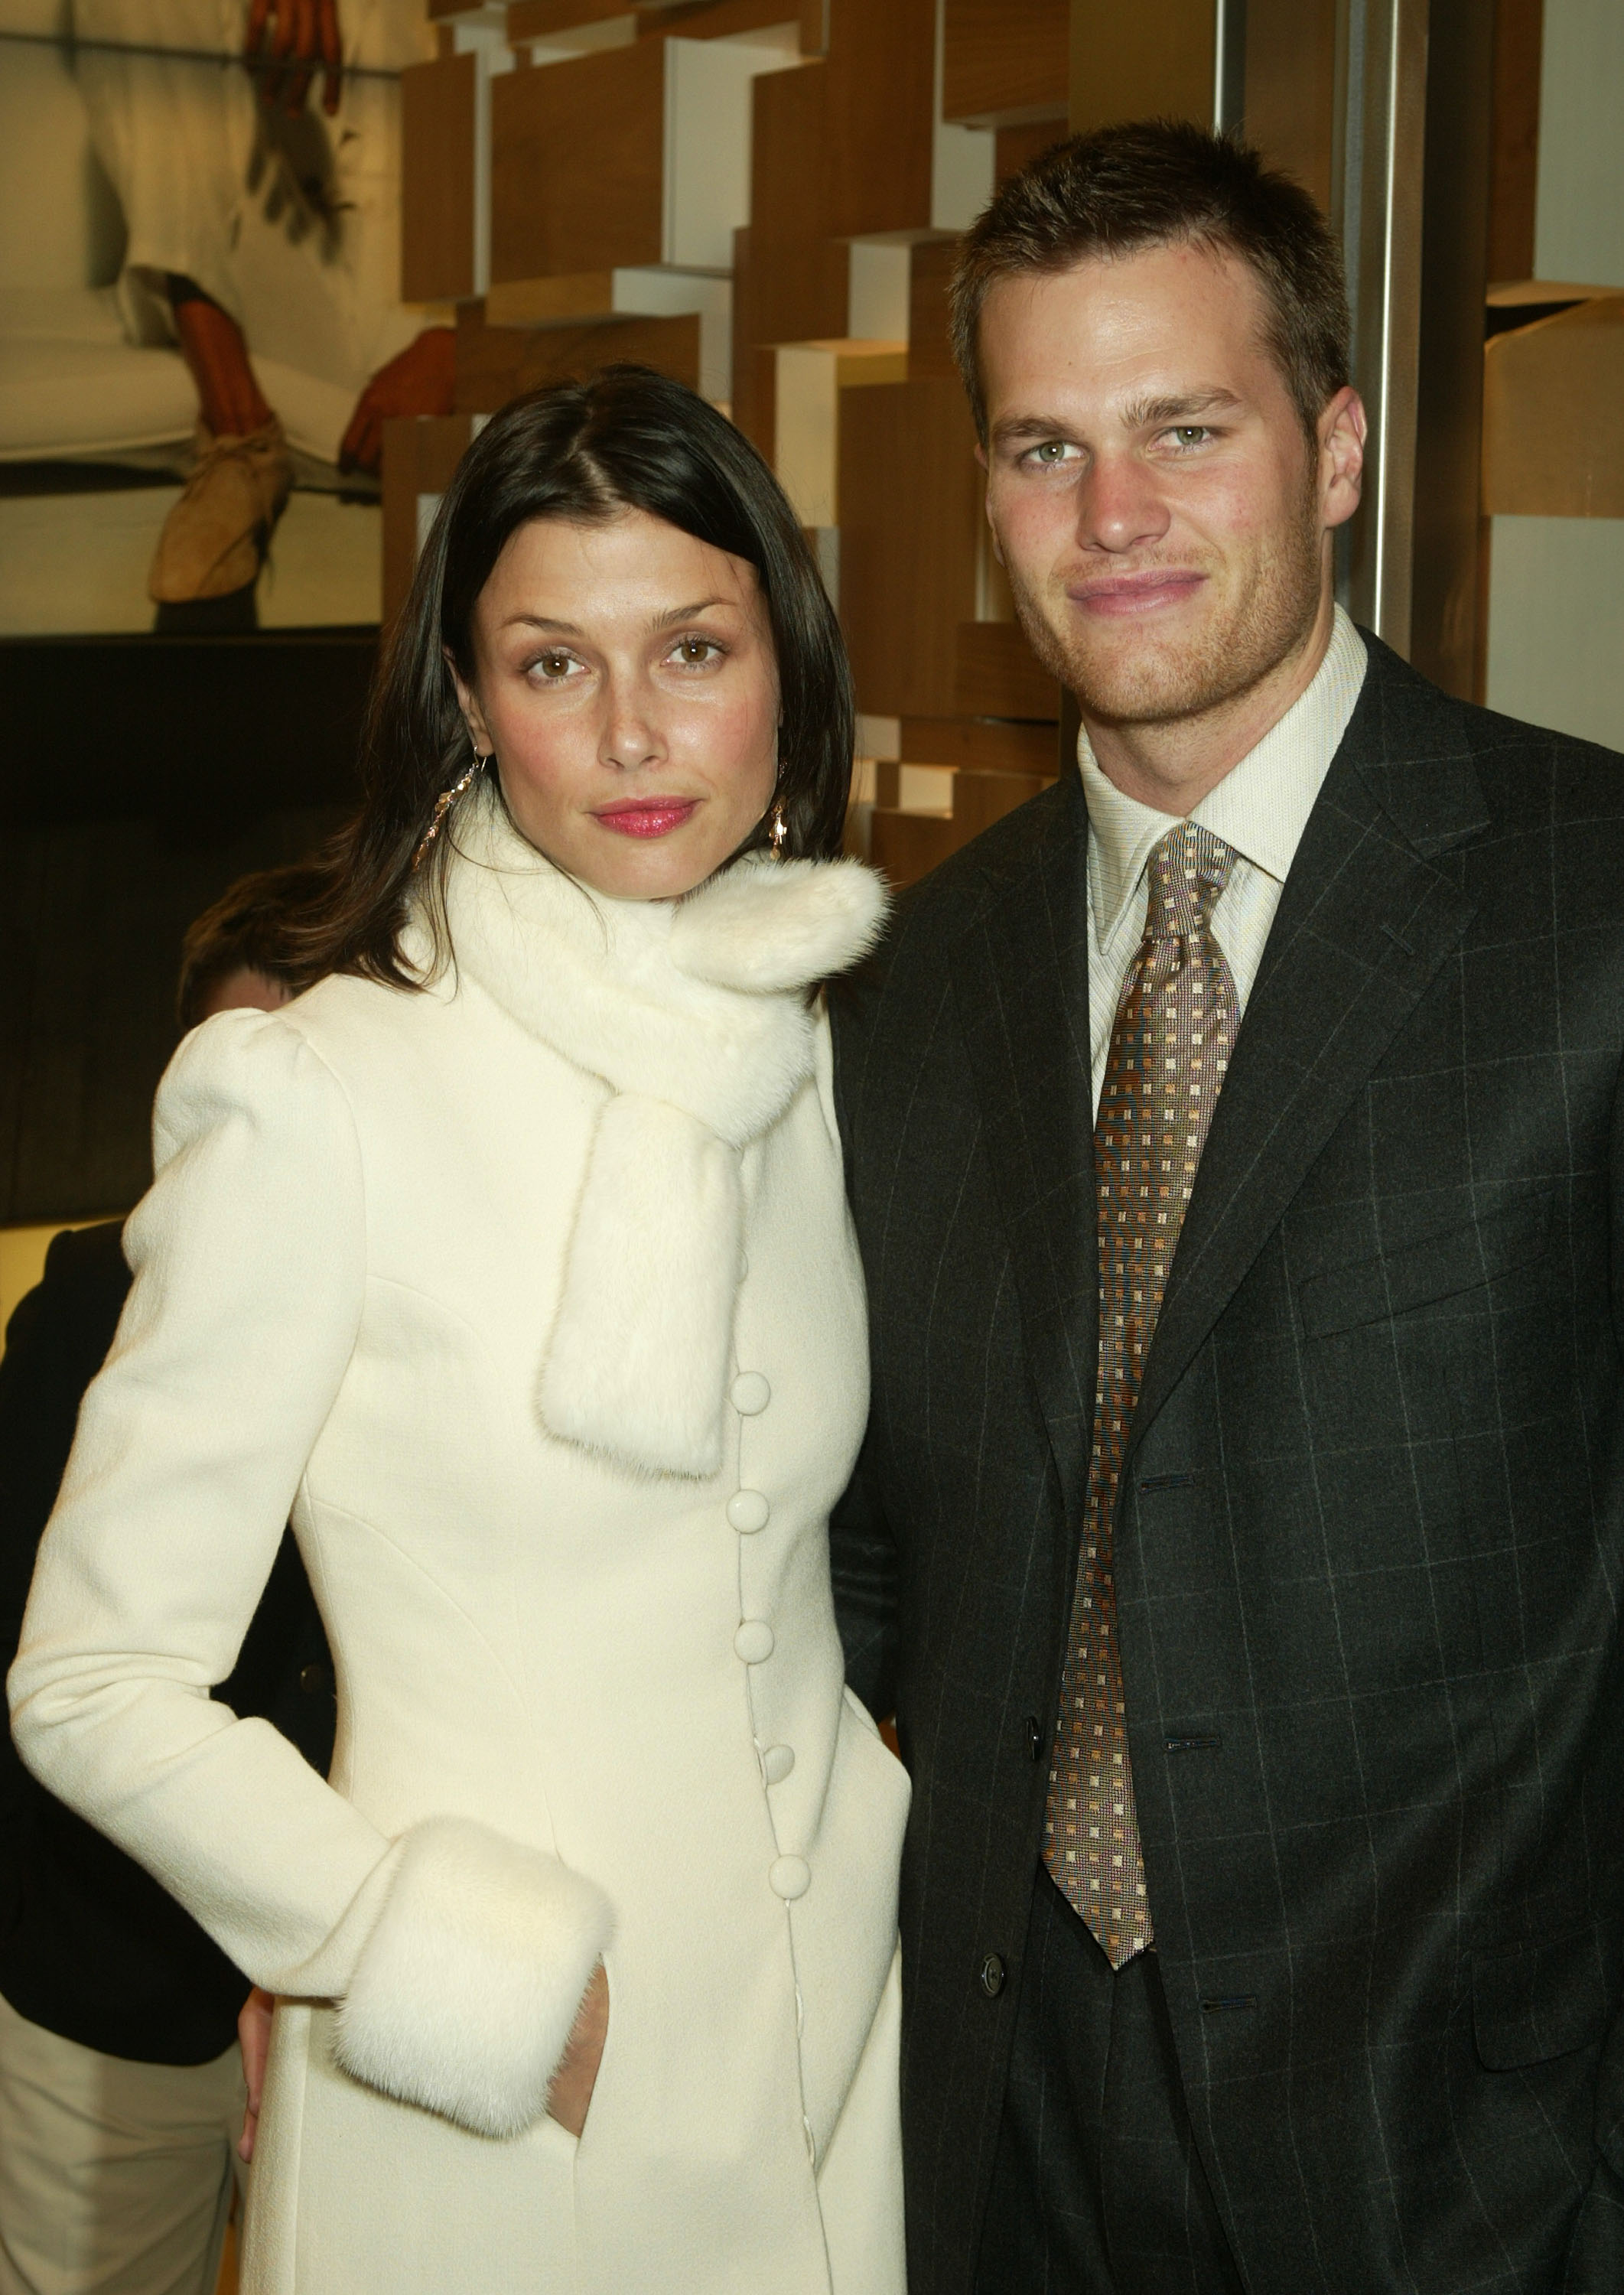 Bridget Moynahan and Tom Brady attend the Ermenegildo Zegna Flagship store opening on April 13, 2004 in New York City | Source: Getty Images